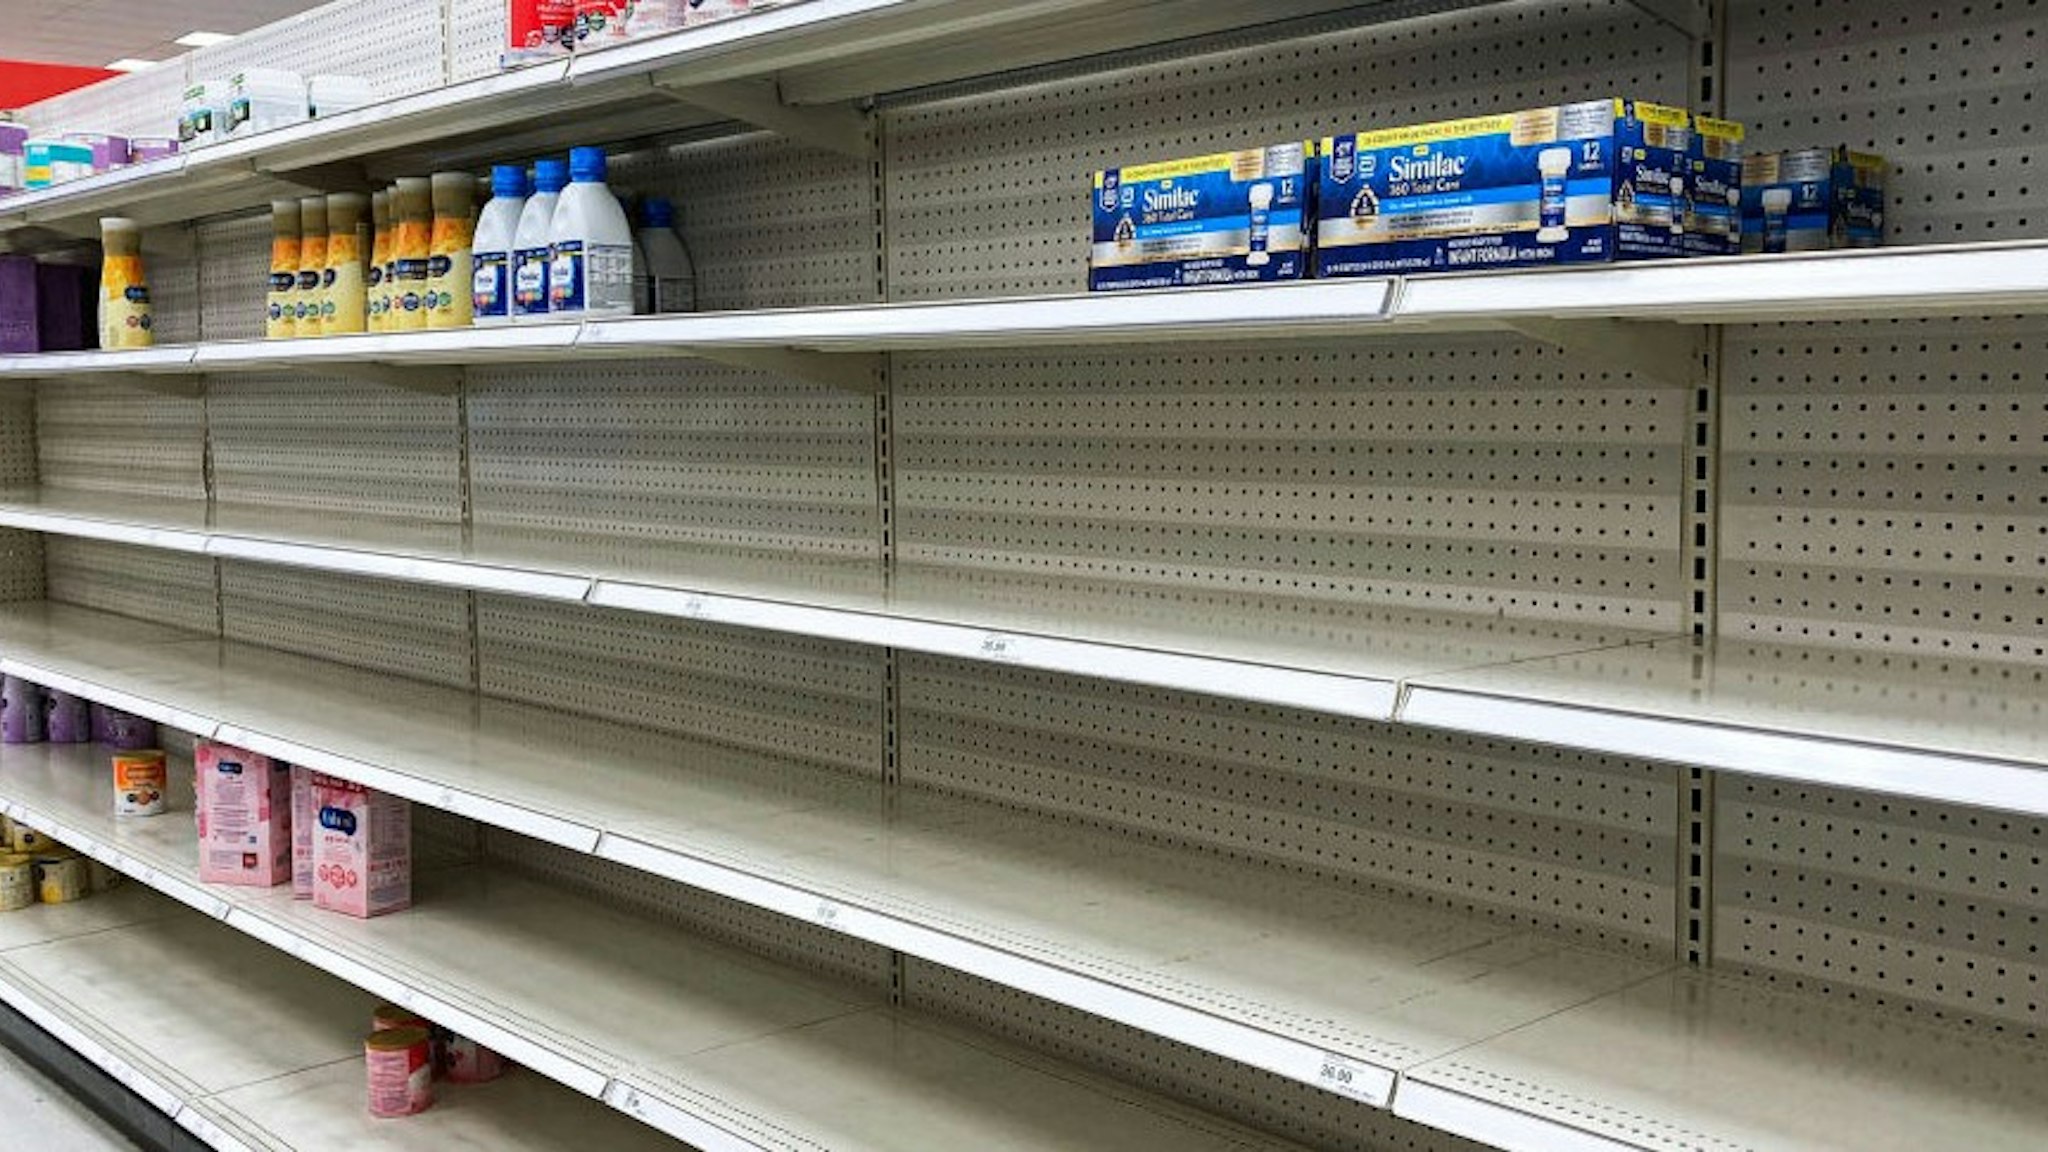 ORLANDO, FLORIDA, UNITED STATES - 2022/05/08: A nearly empty baby formula display shelf is seen at a Target store in Orlando. Stores across the United States have struggled to stock enough baby formula, causing some chains to limit customer purchases. While manufacturers report that they are producing at full capacity, it's still insufficient to meet the current demand, which has been aggravated by product recalls. (Photo by